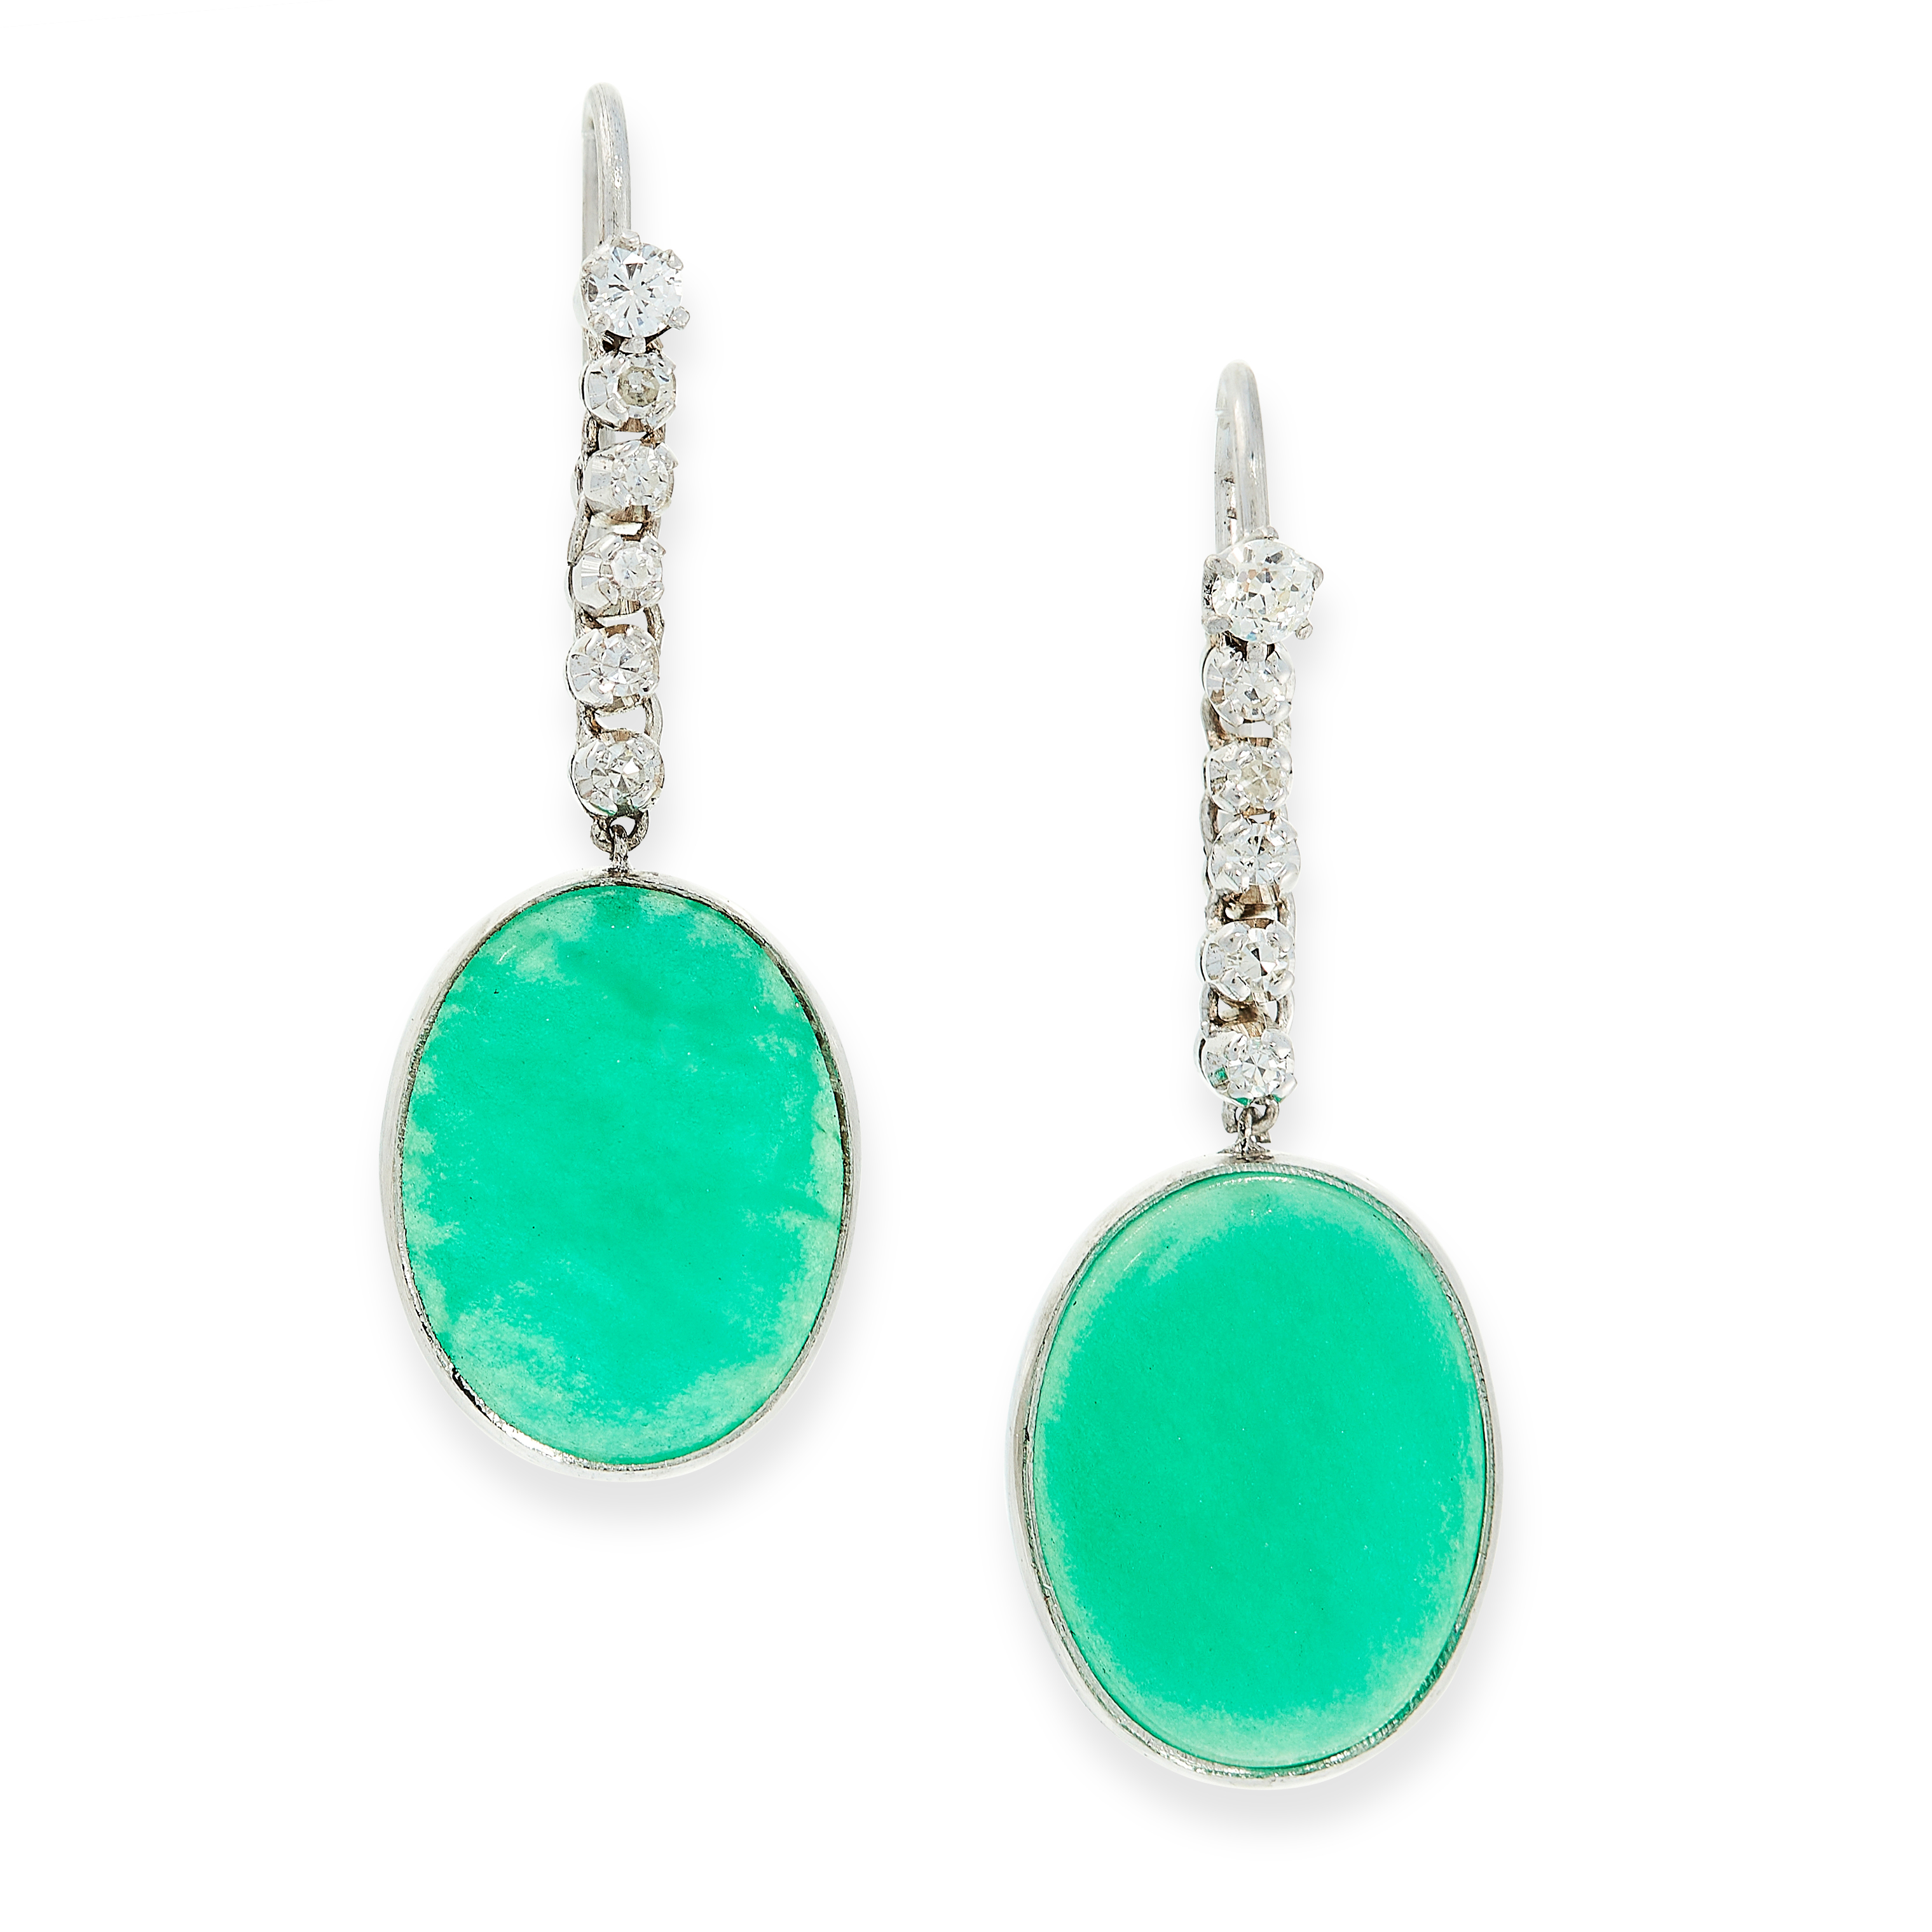 PAIR OF AGATE AND DIAMOND EARRINGS each set with an oval cabochon green agate, suspended below